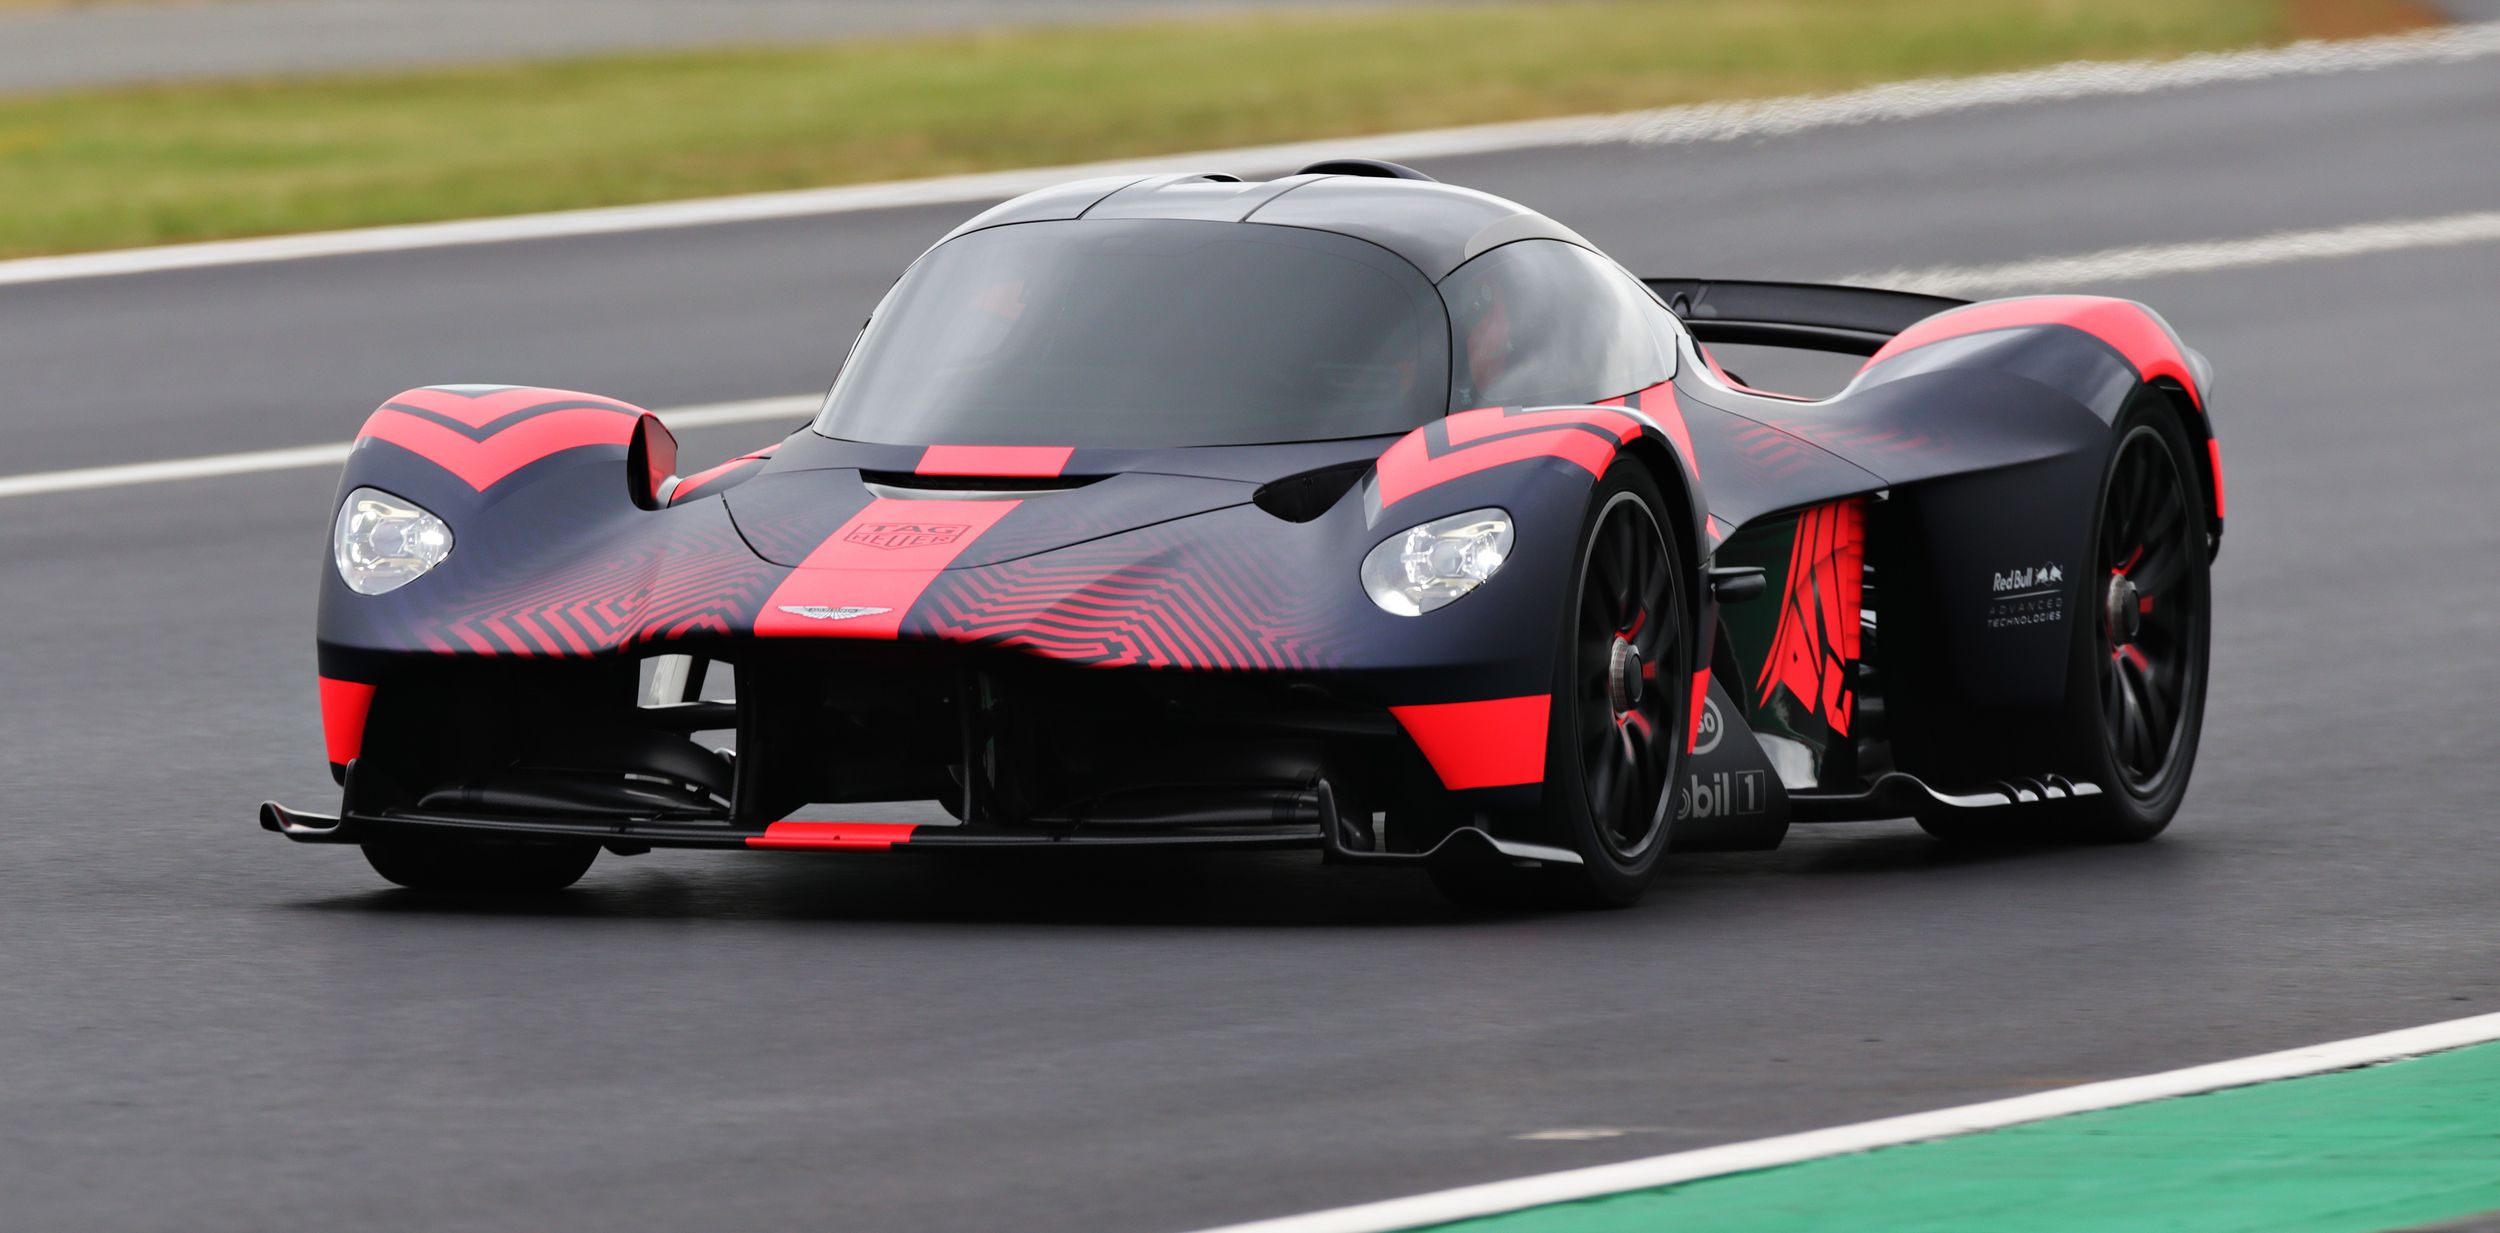 Fichiers Tuning Haute Qualité Aston Martin Valkyrie 6.5 V12  1176hp